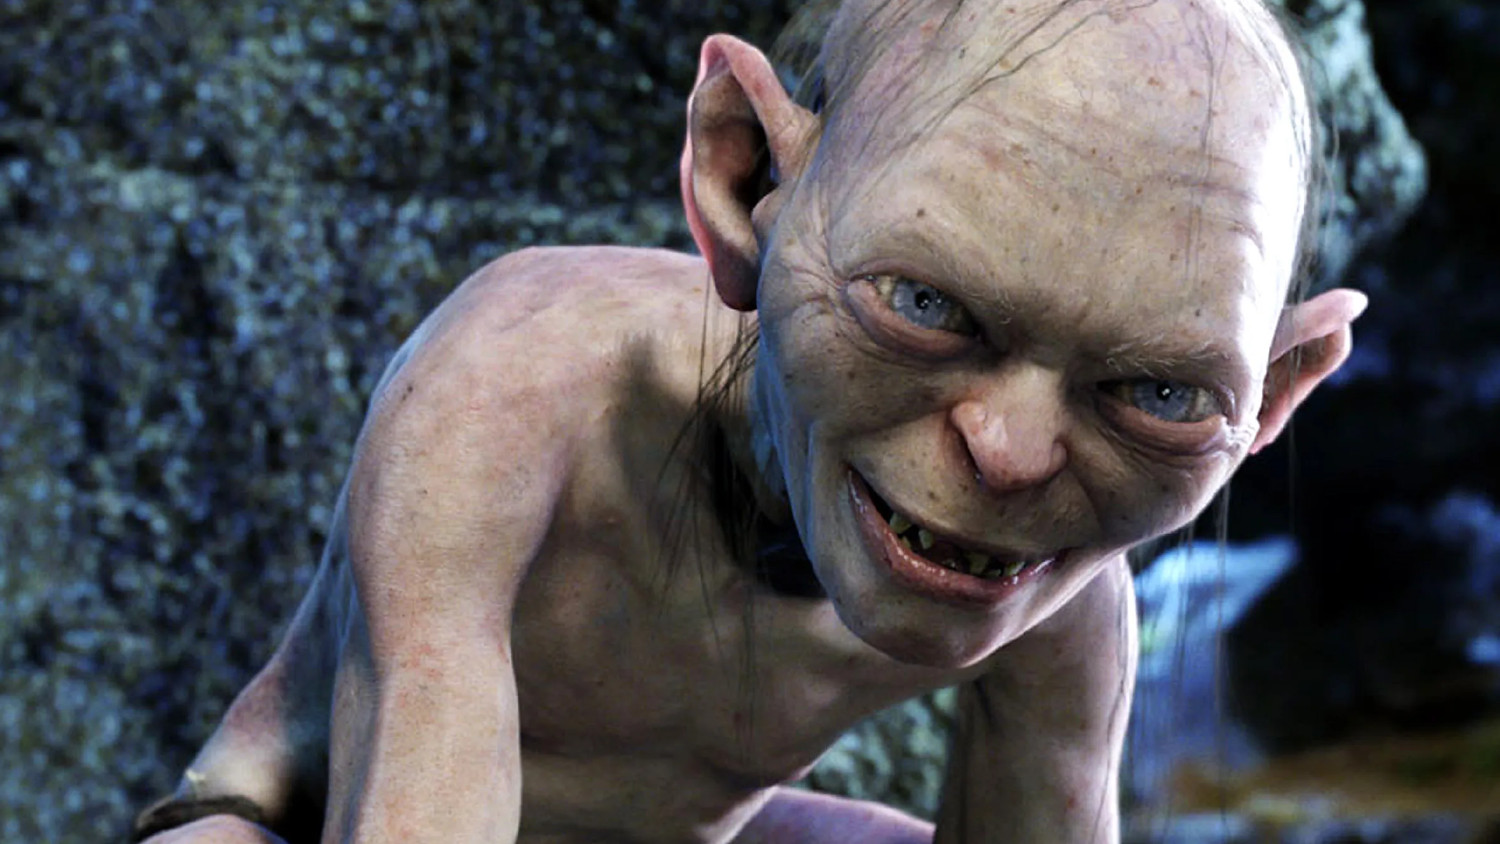 Peter Jackson, Andy Serkis Returning For New ‘Lord of the Rings’ Movies